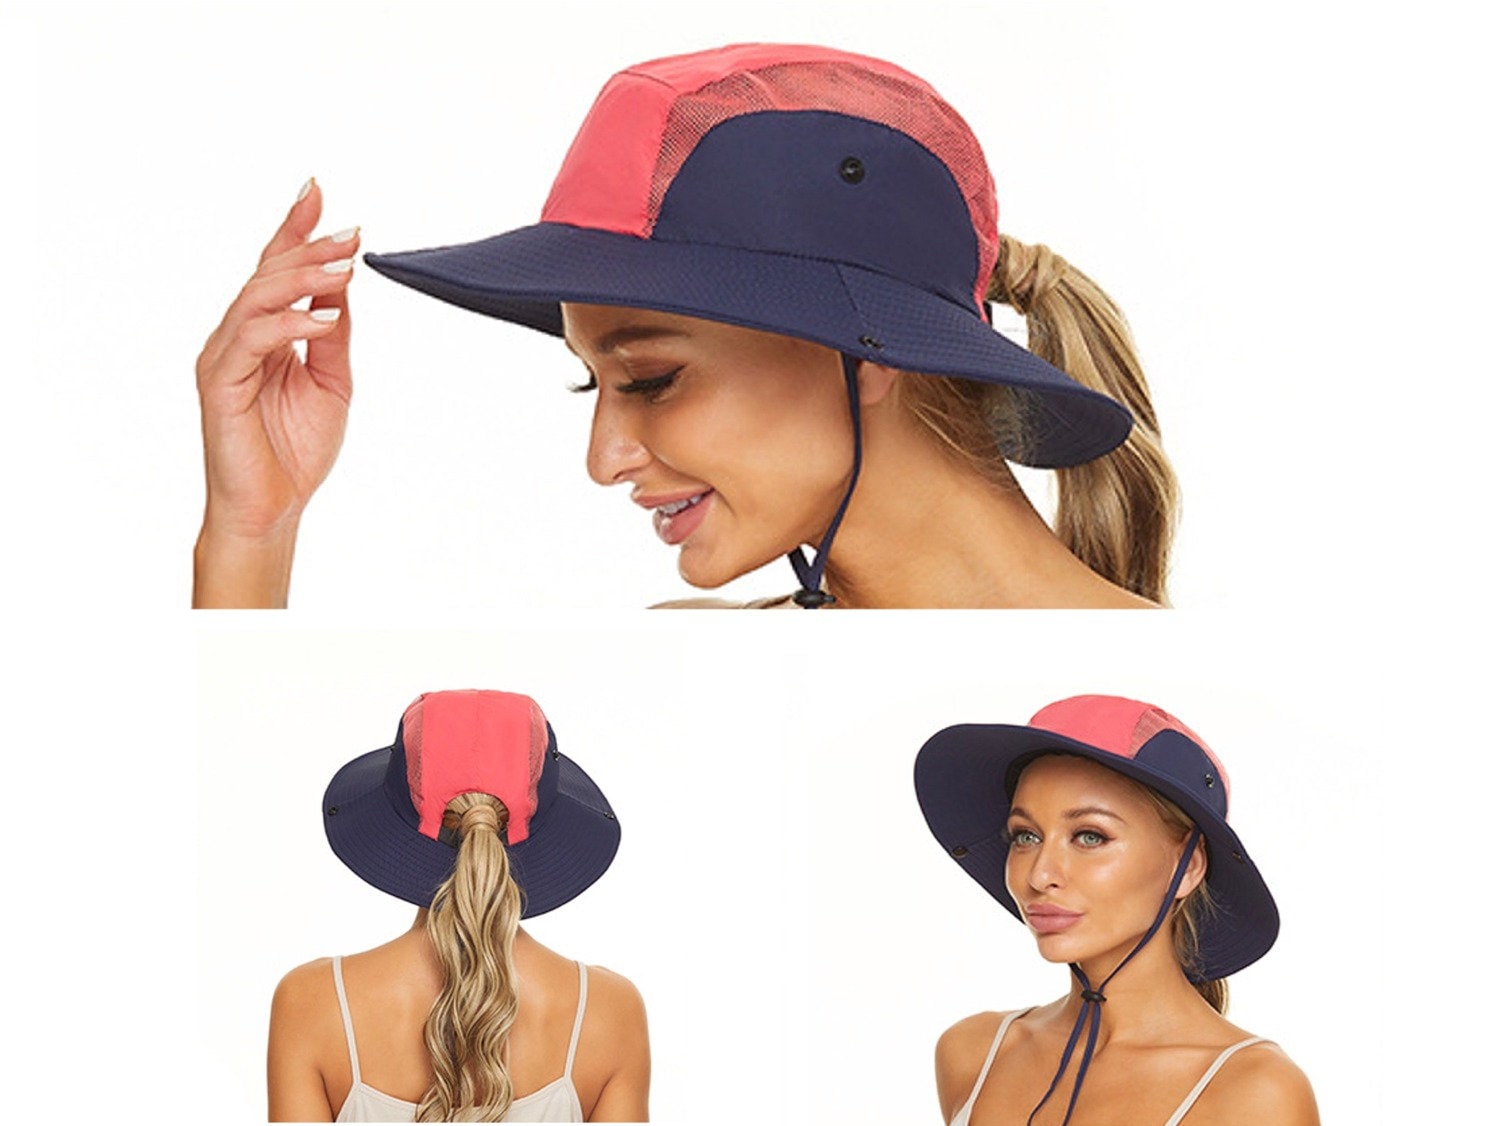 Women Sun Hat With Ponytail Hole 